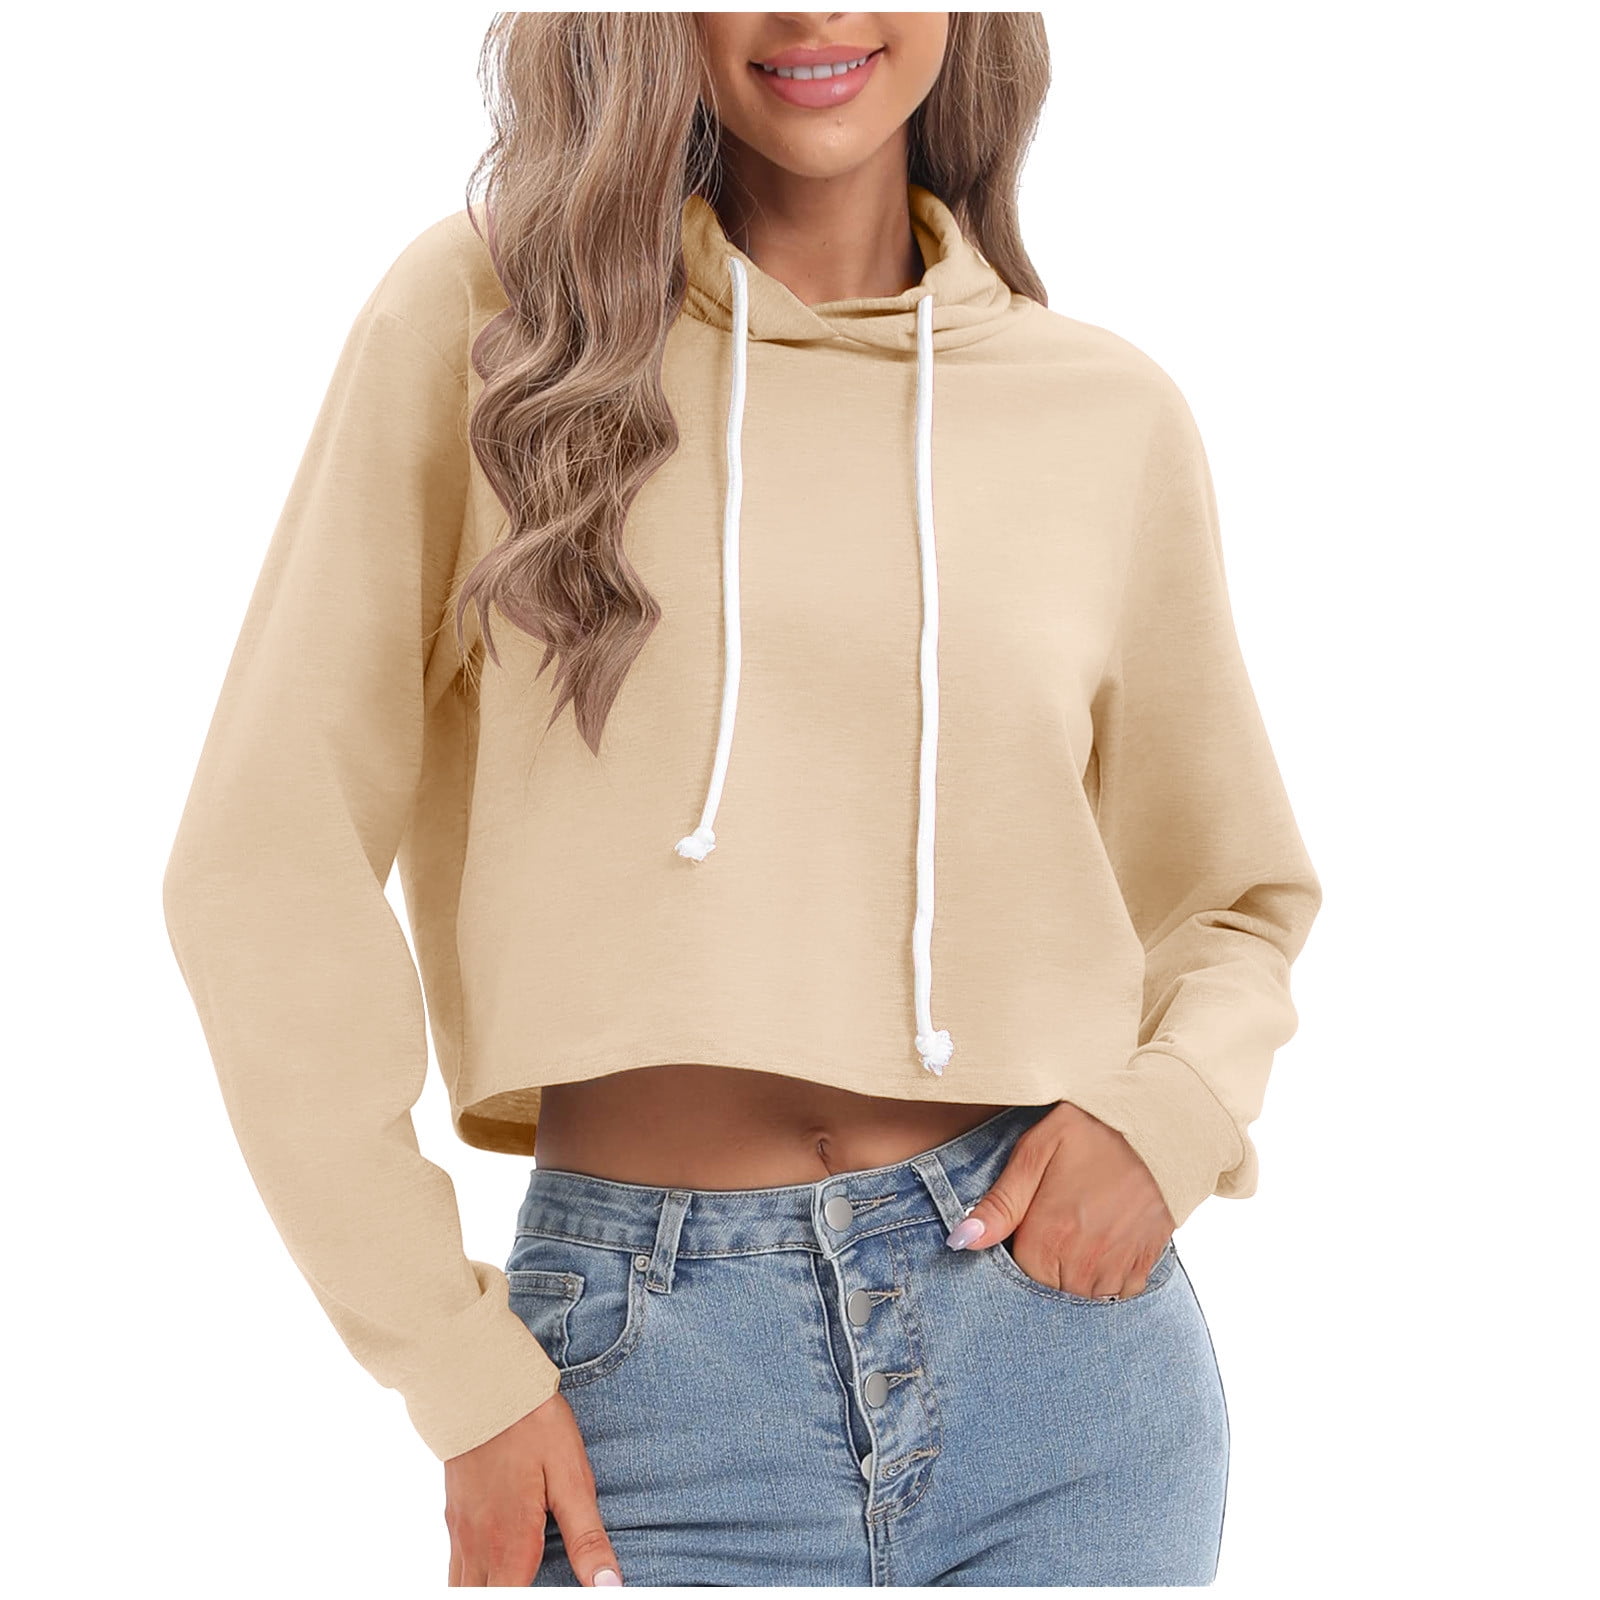 XFLWAM Womens Winter Warm Hoodies Solid Color Pullover Casual Sweatshirts  Long Sleeve Tops Loose Hoodie with Pockets Khaki M 